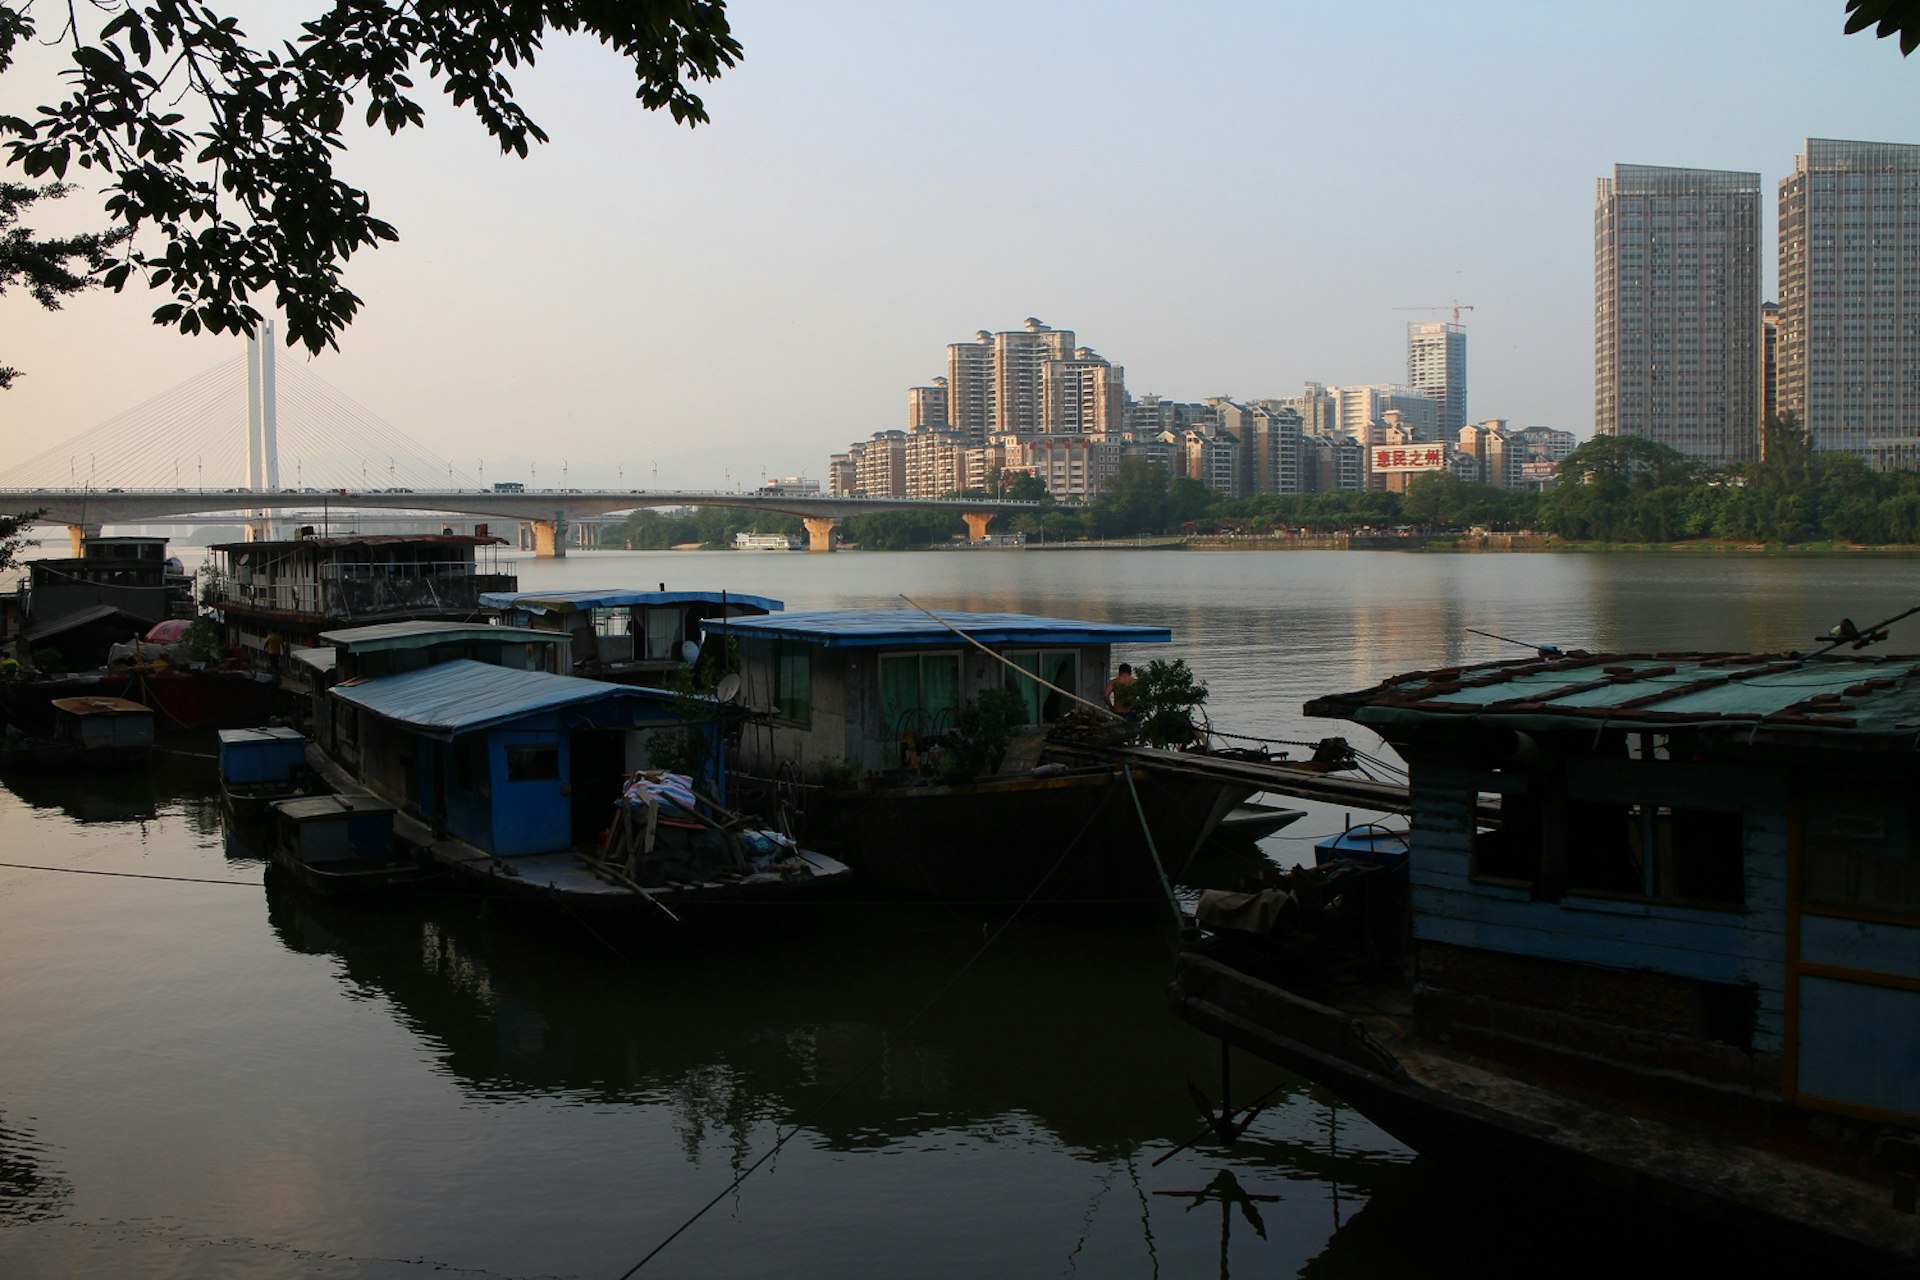 Old vs new: looking across the Dong River to Huizhou's new Jiangbei district. Image by Thomas Bird / Lonely Planet